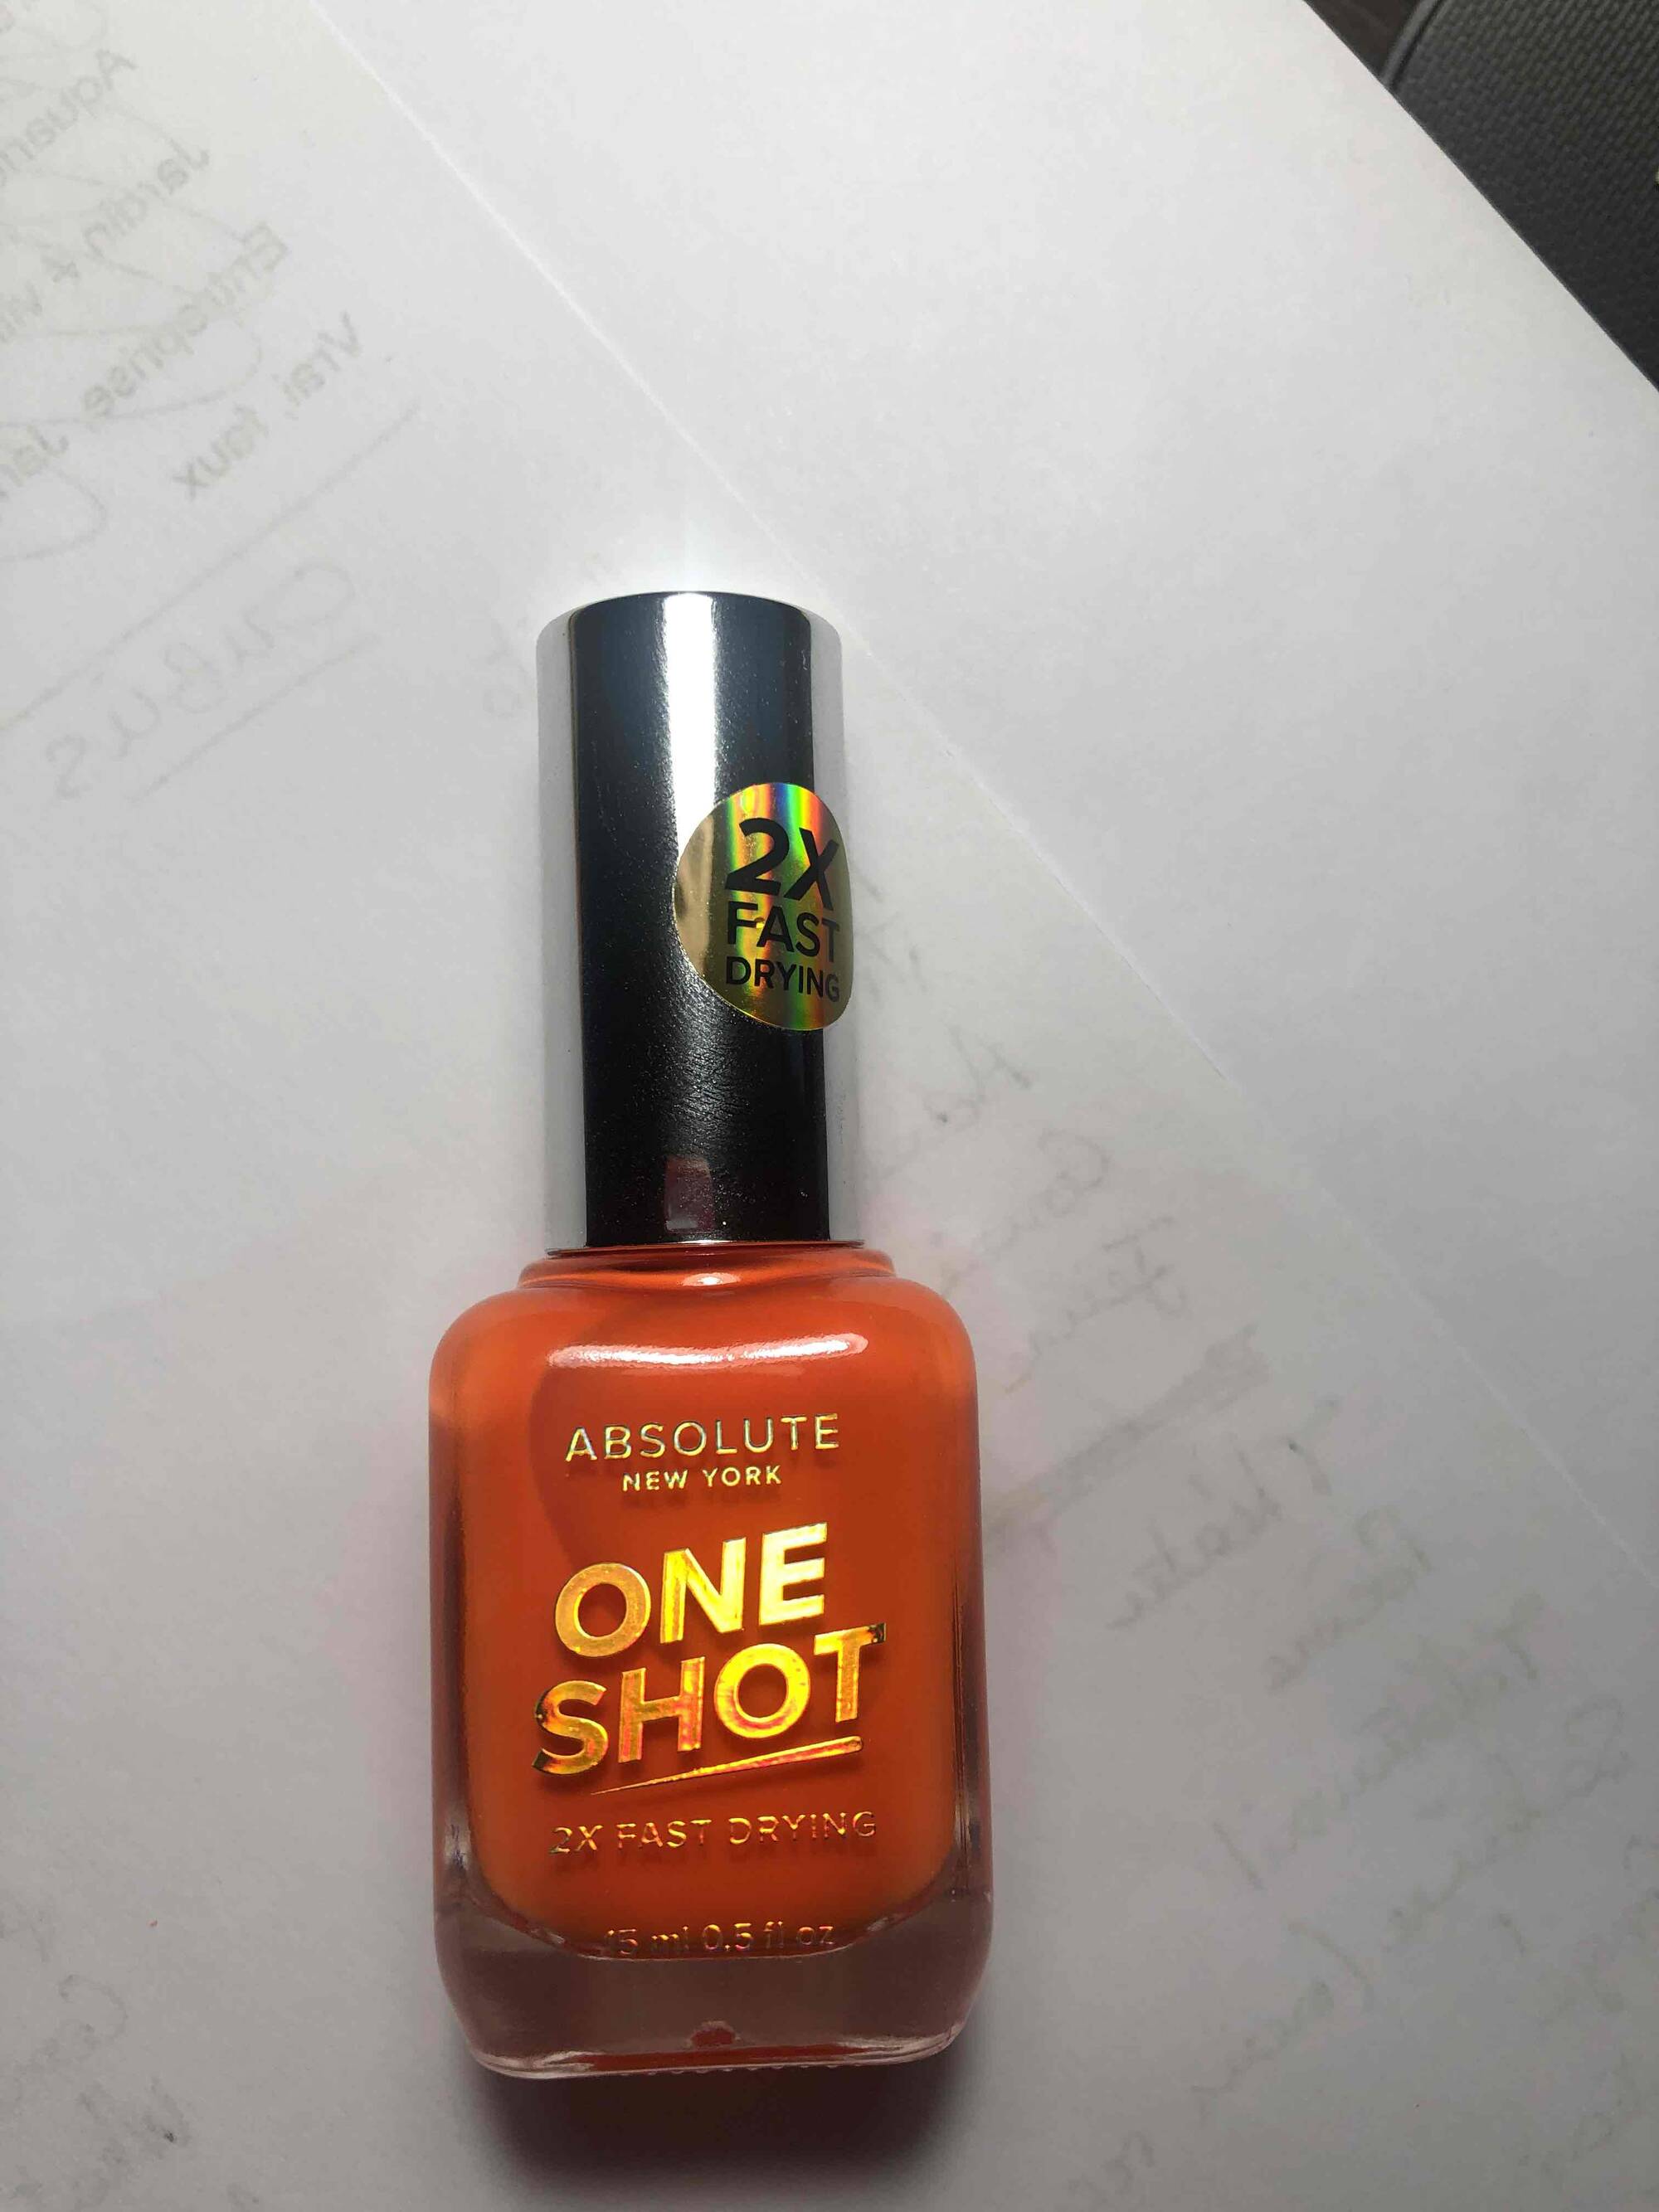 ABSOLUTE - One shot - Vernis à ongles